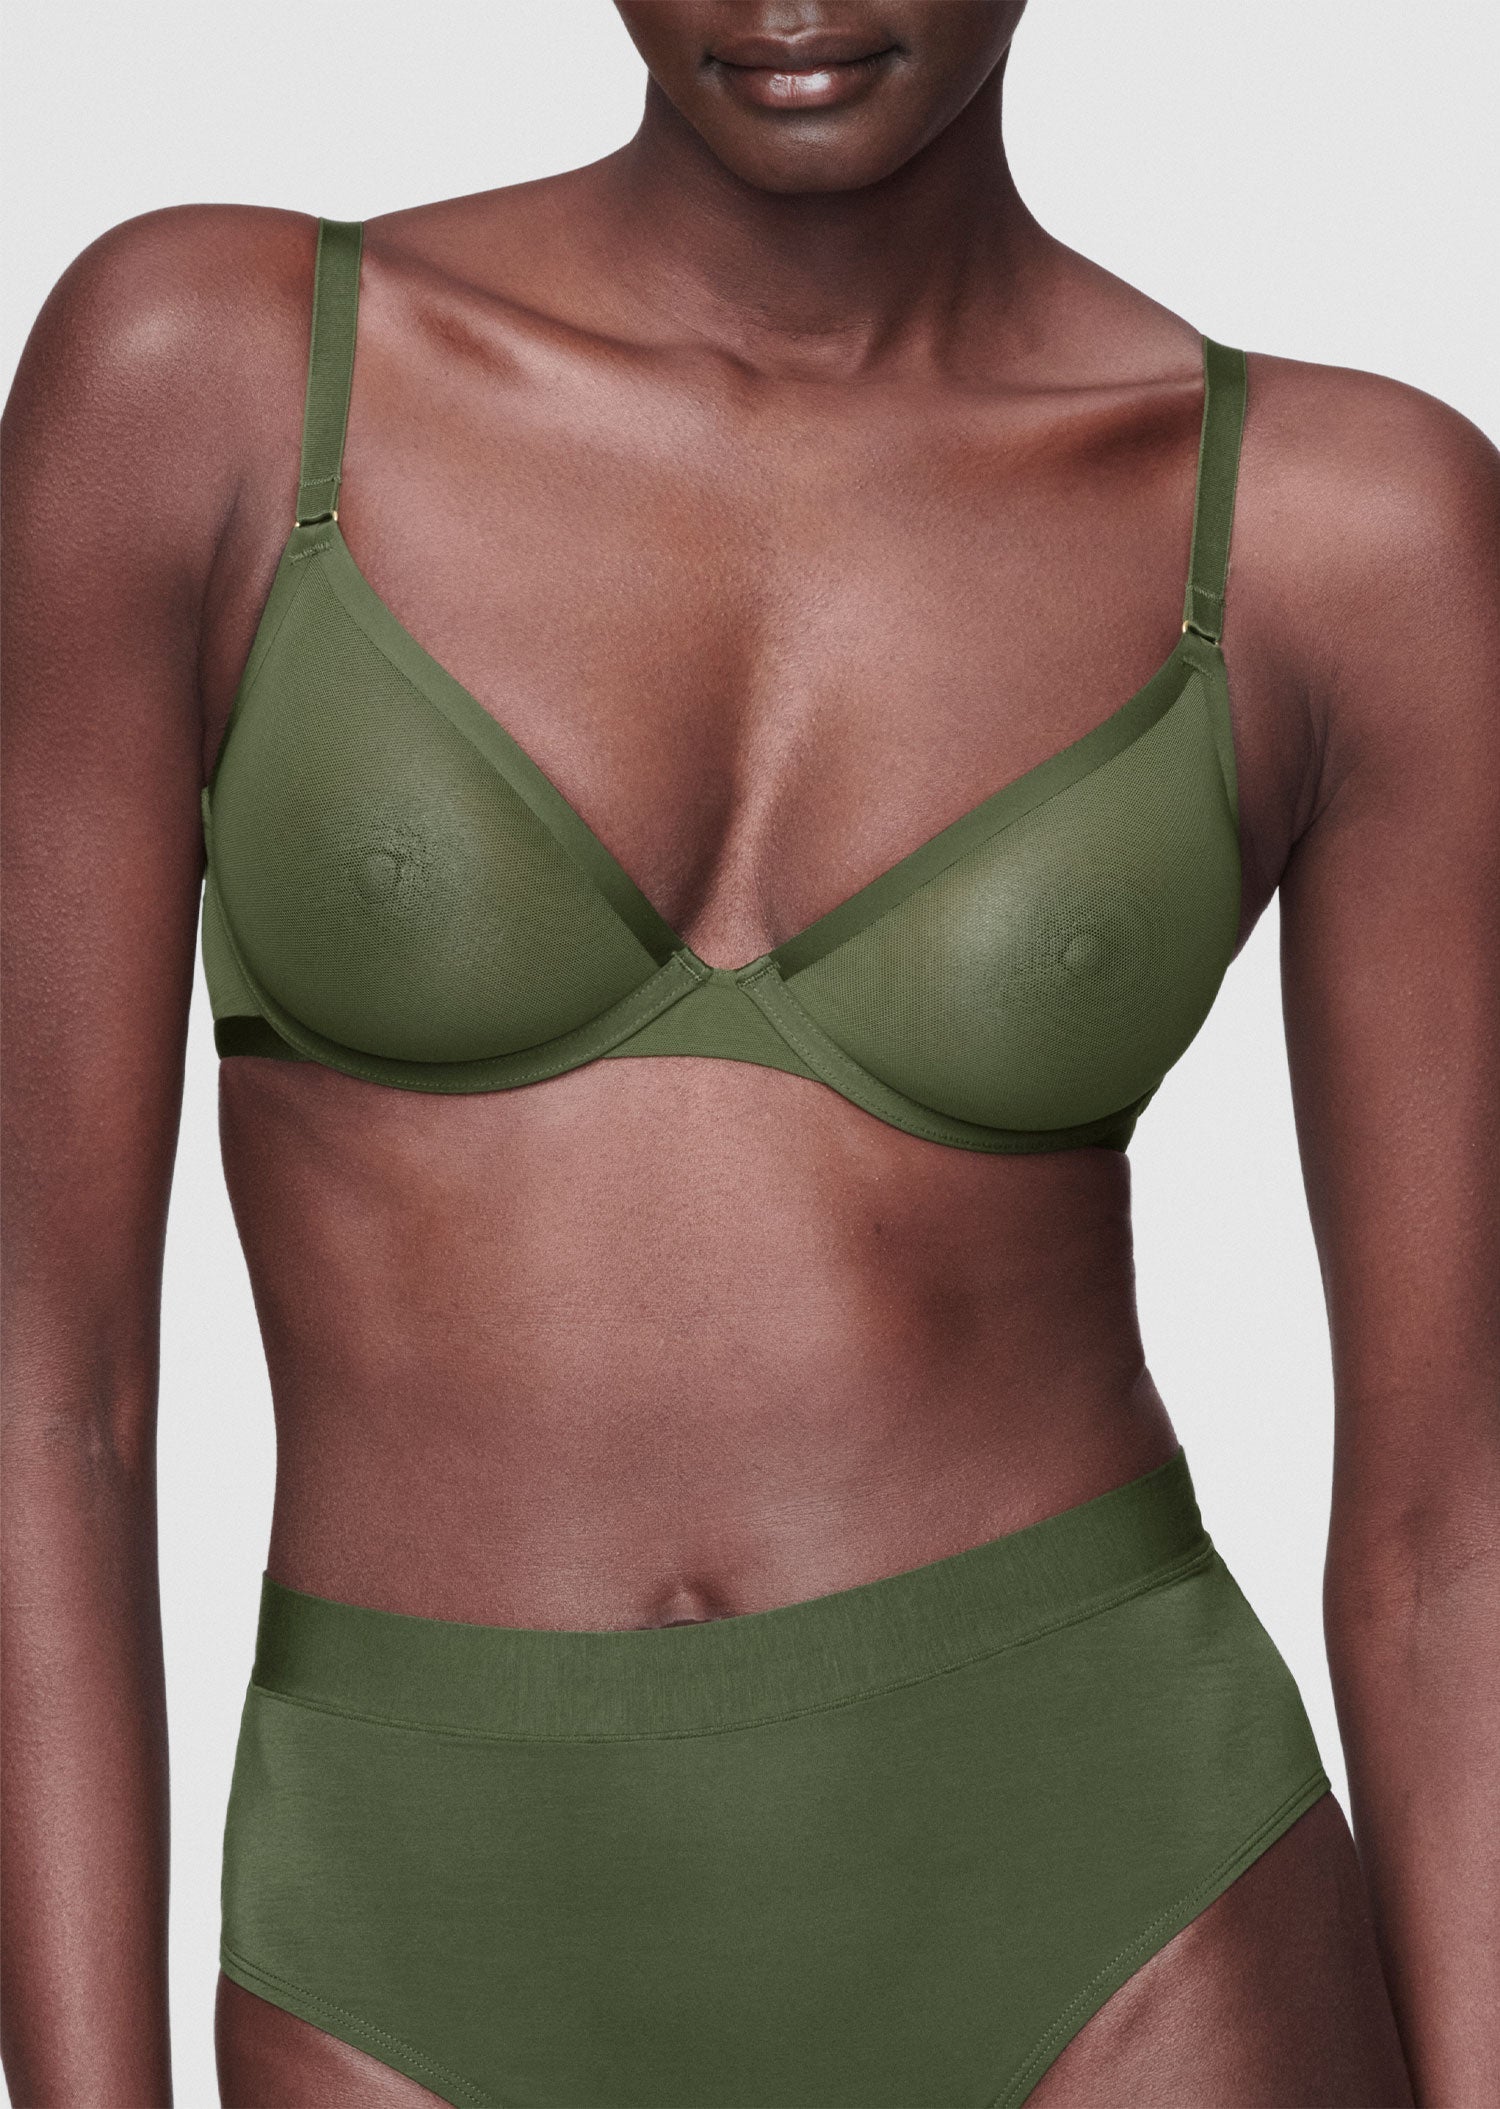 CUUP Bras The Plunge - Mesh, Blush at discount price Cheap CUUP Store